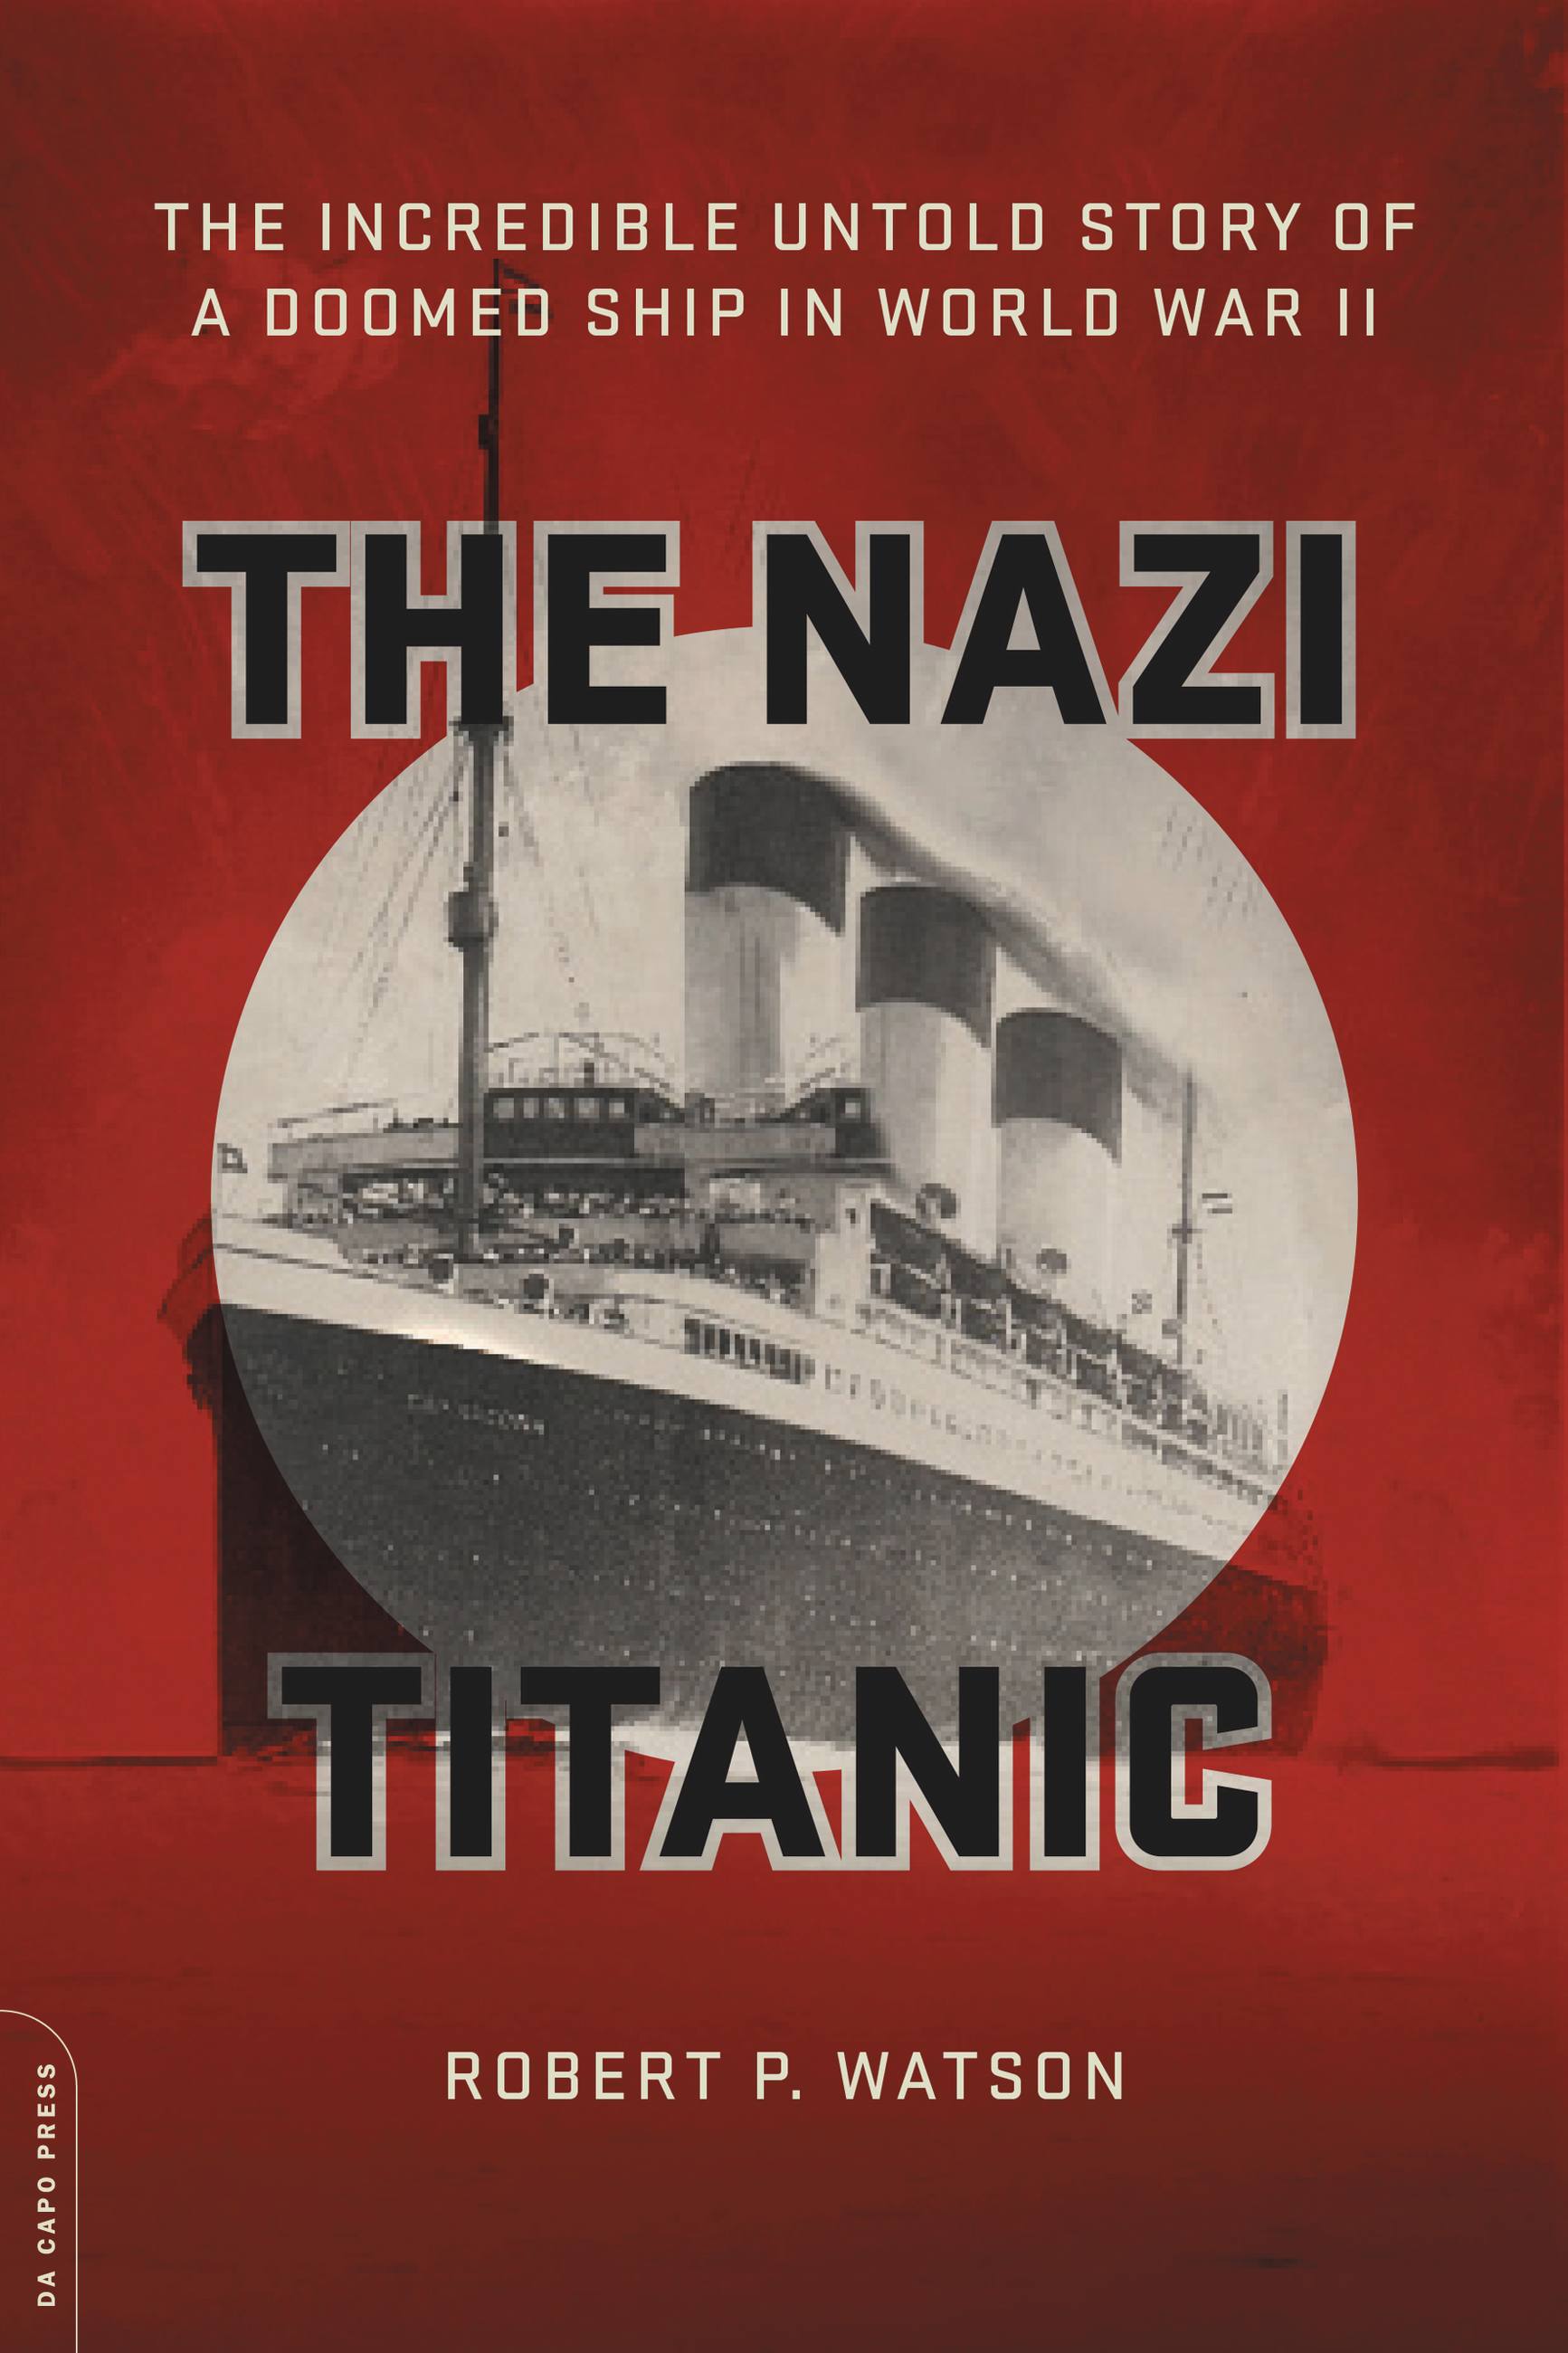 Umschlagbild für The Nazi Titanic [electronic resource] : The Incredible Untold Story of a Doomed Ship in World War II